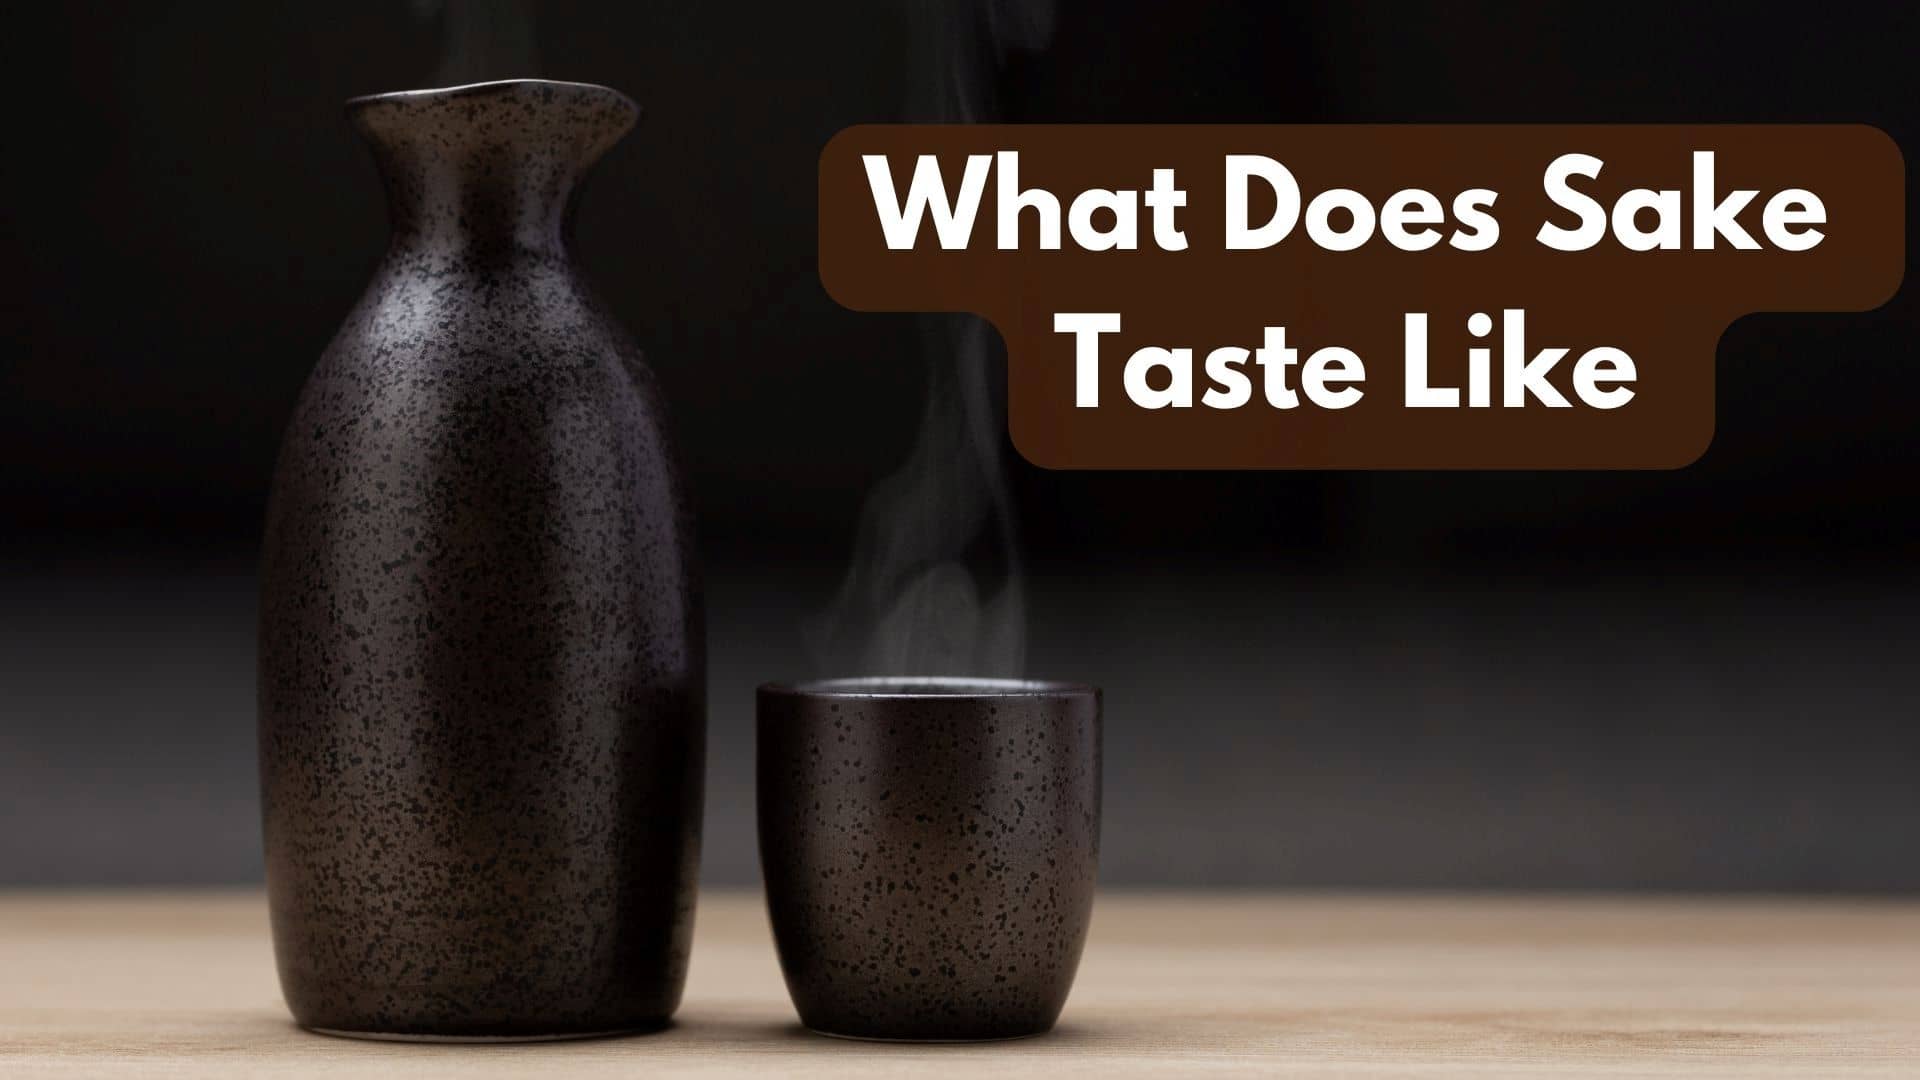 What Does Sake Taste Like In Comparison To Other Drinks